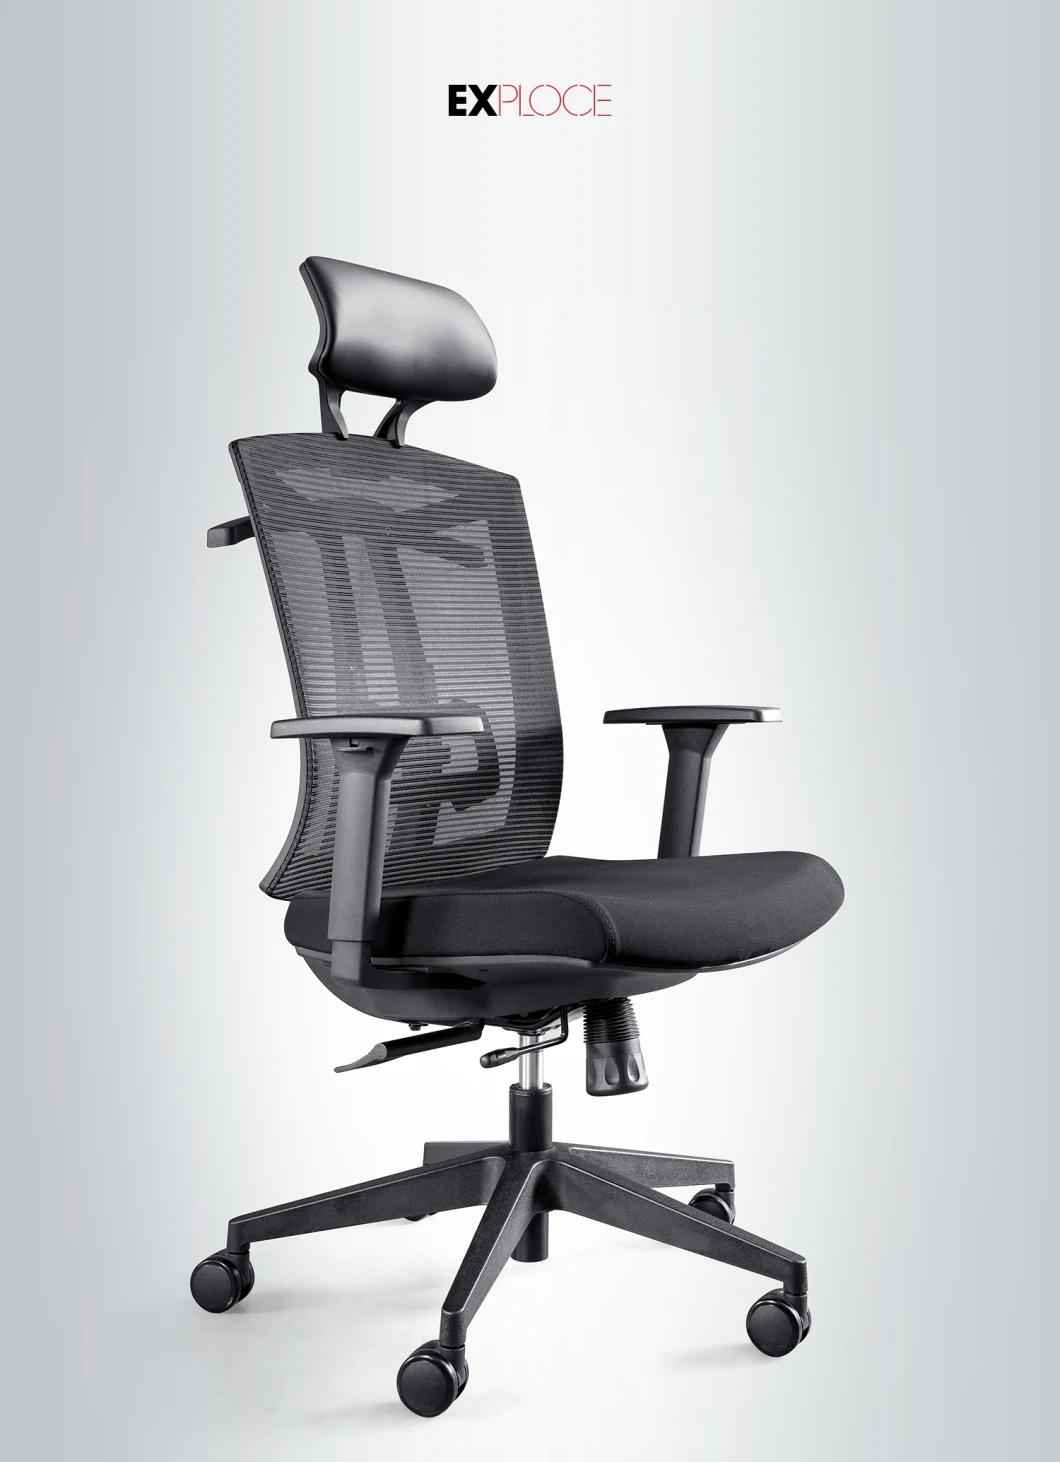 Manufacture PA+Fiber Glass New Office Furniture Boss Chair Swivel Task Laptop Game